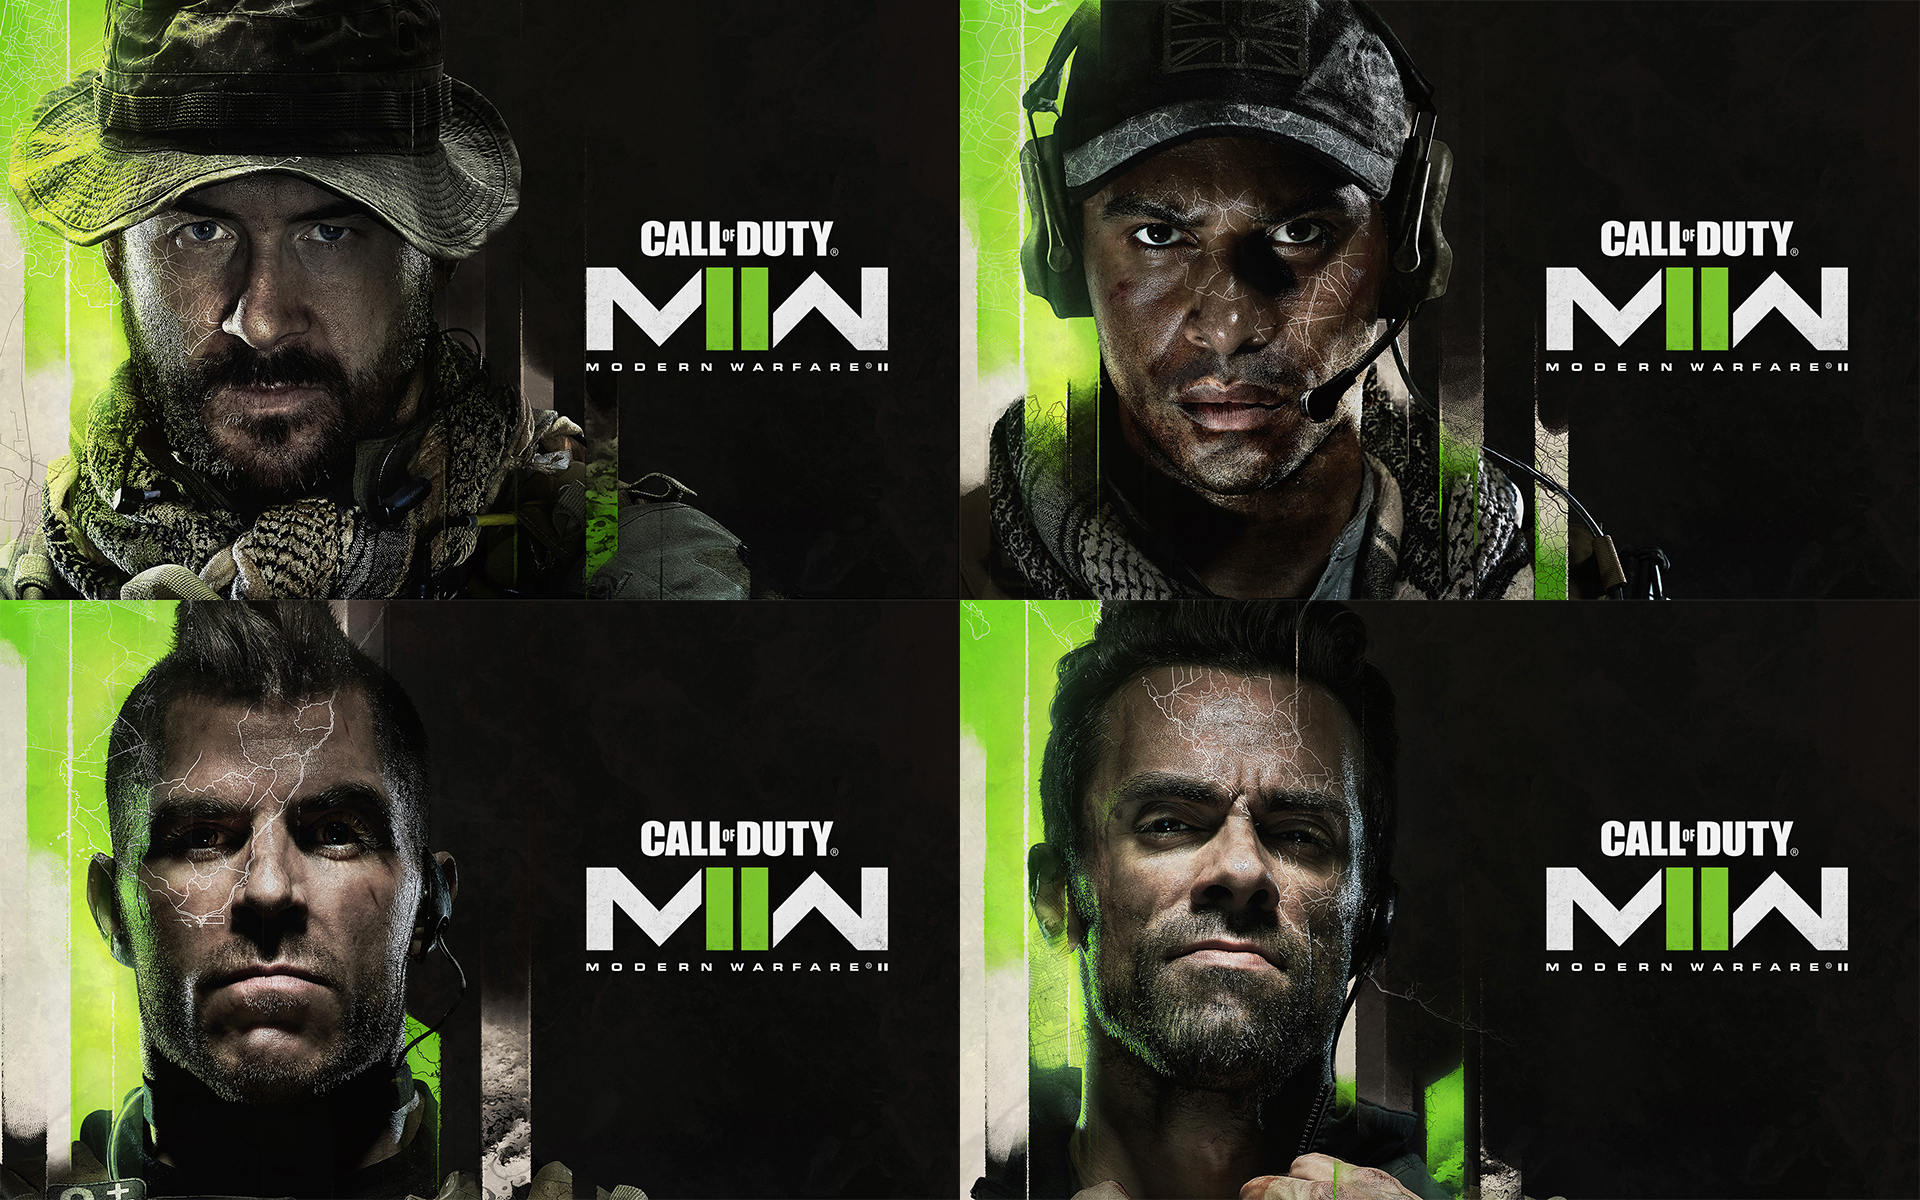 1920x1200 Assemble The Task Force New Era of Call of Duty Begins October 28th